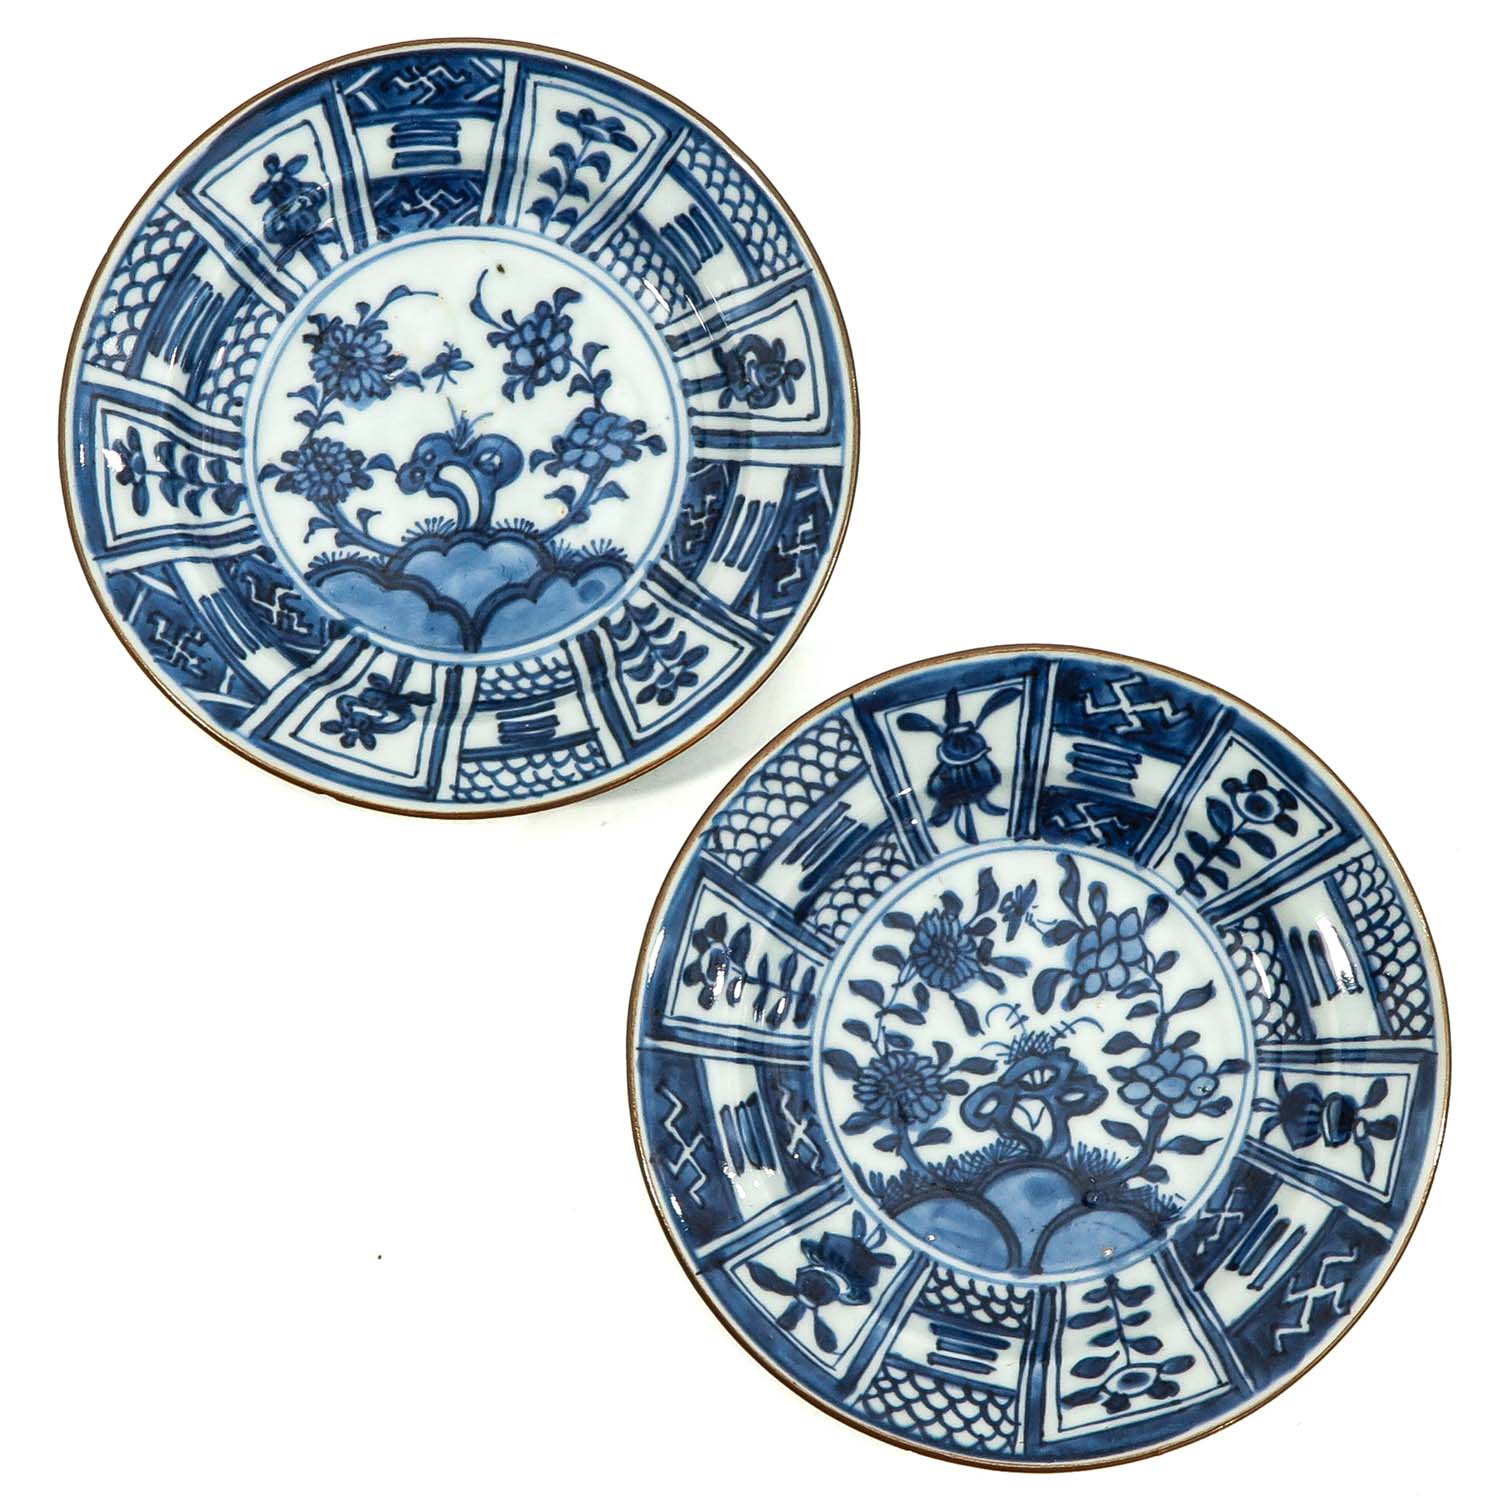 A Collection of 6 Blue and White Plates - Image 5 of 10